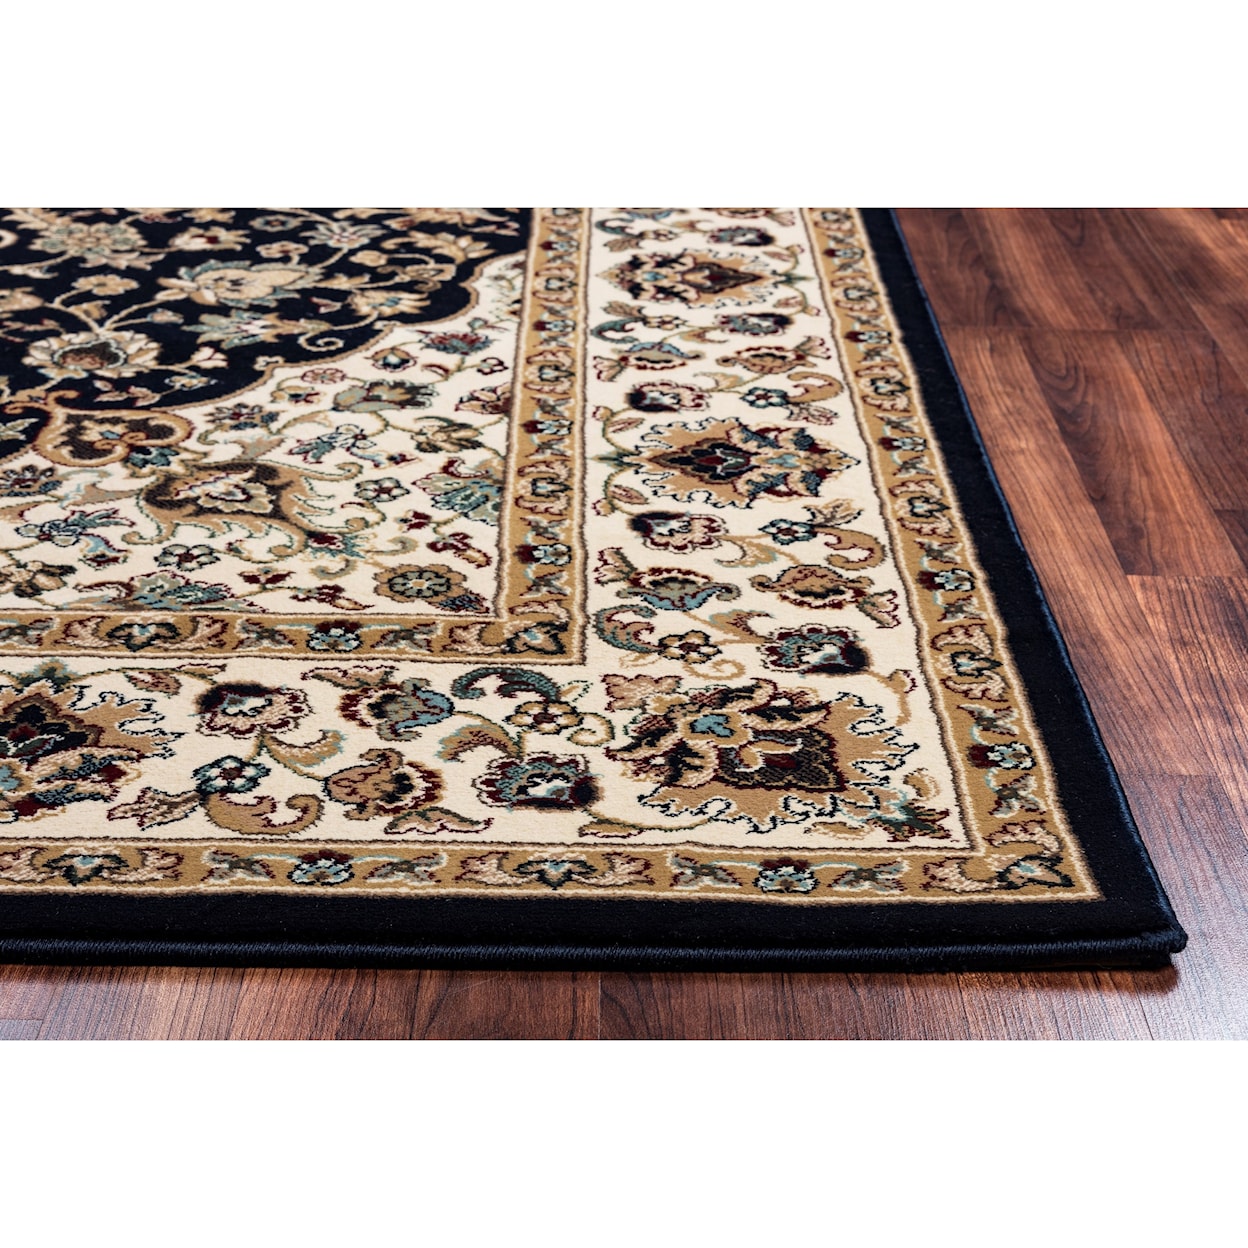 Rizzy Home Chateau 5'3" x 7'7" Rectangle Rug